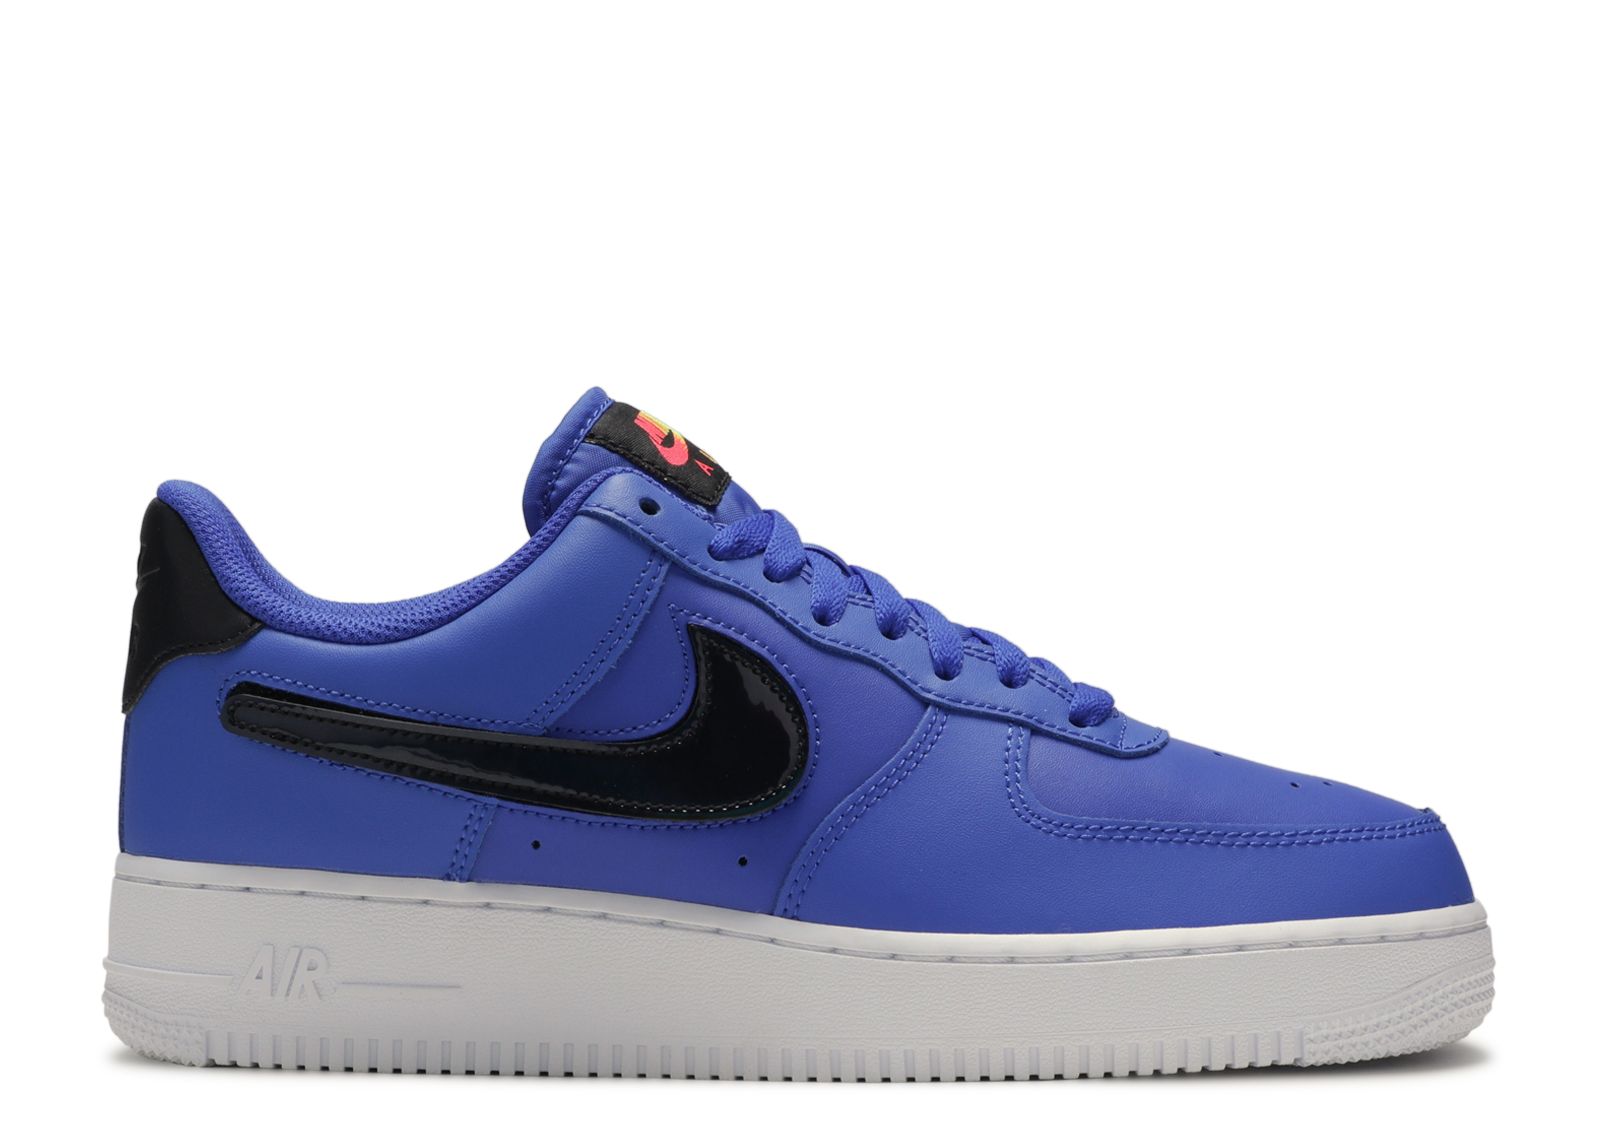 Air Force 1 Low LV8 3 'Racer Blue 